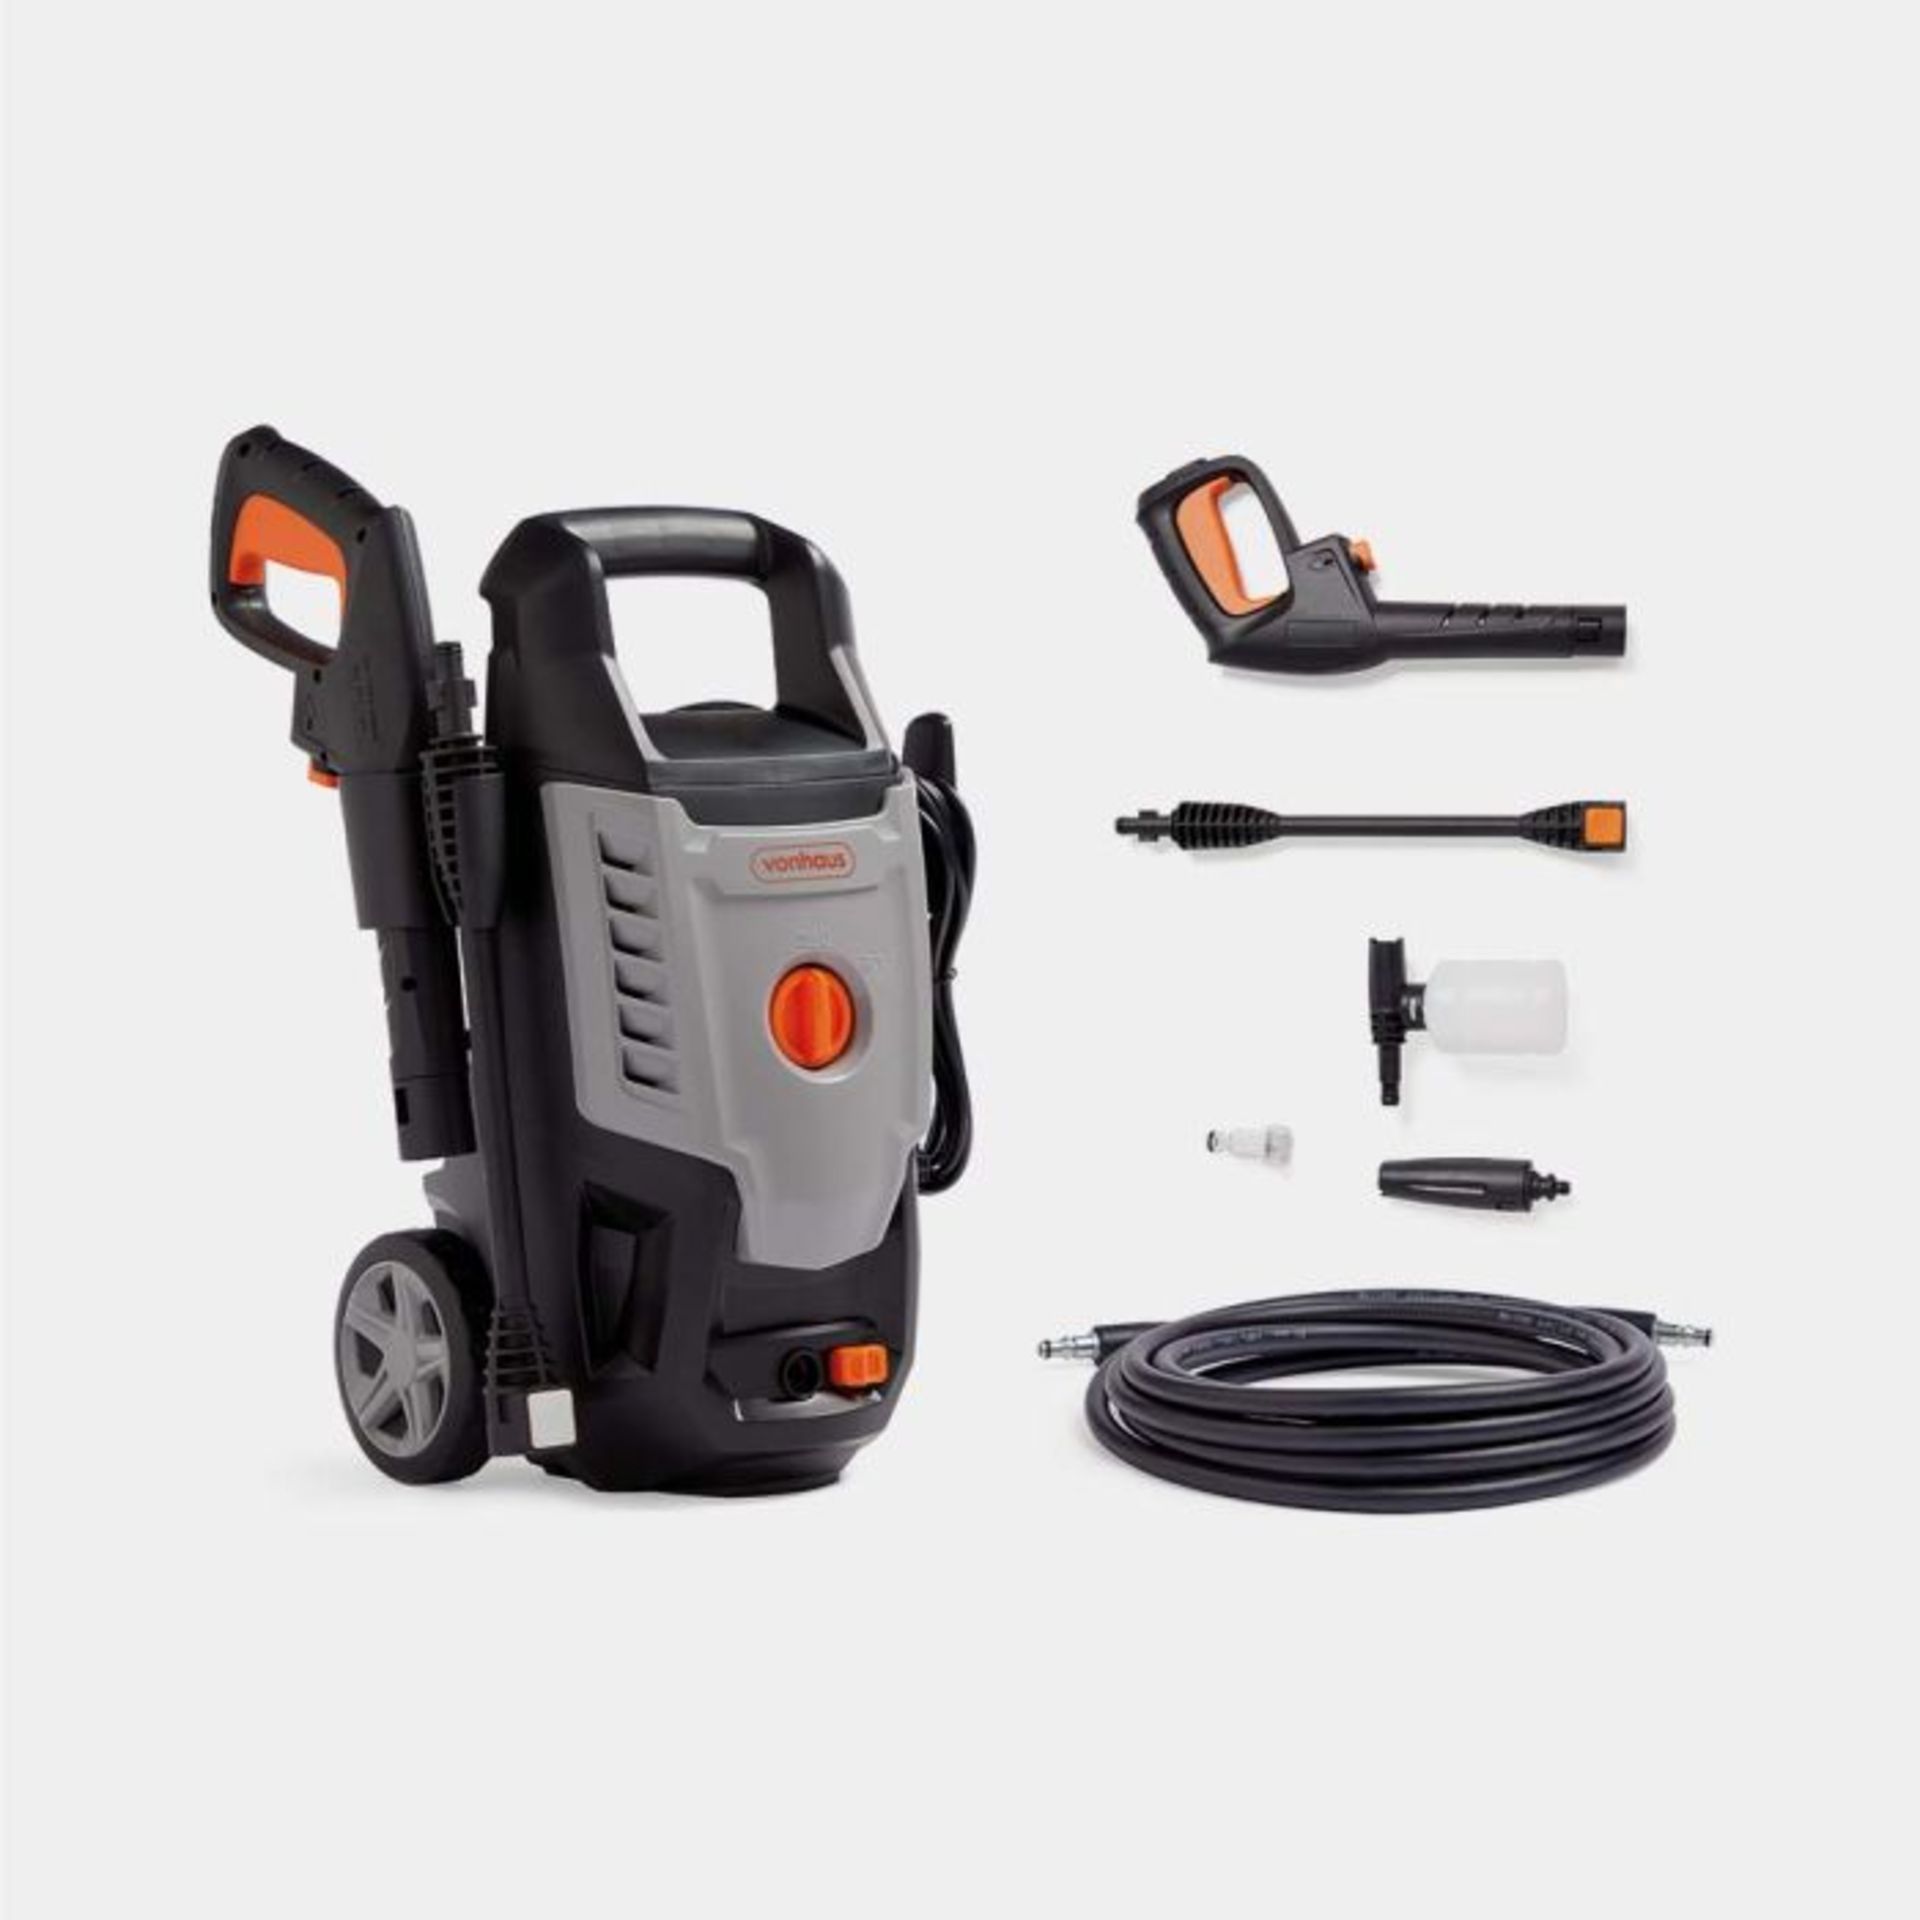 1600W Pressure Washer. -ER36. Featuring a wobble pump for self-priming, the washer is powered by a